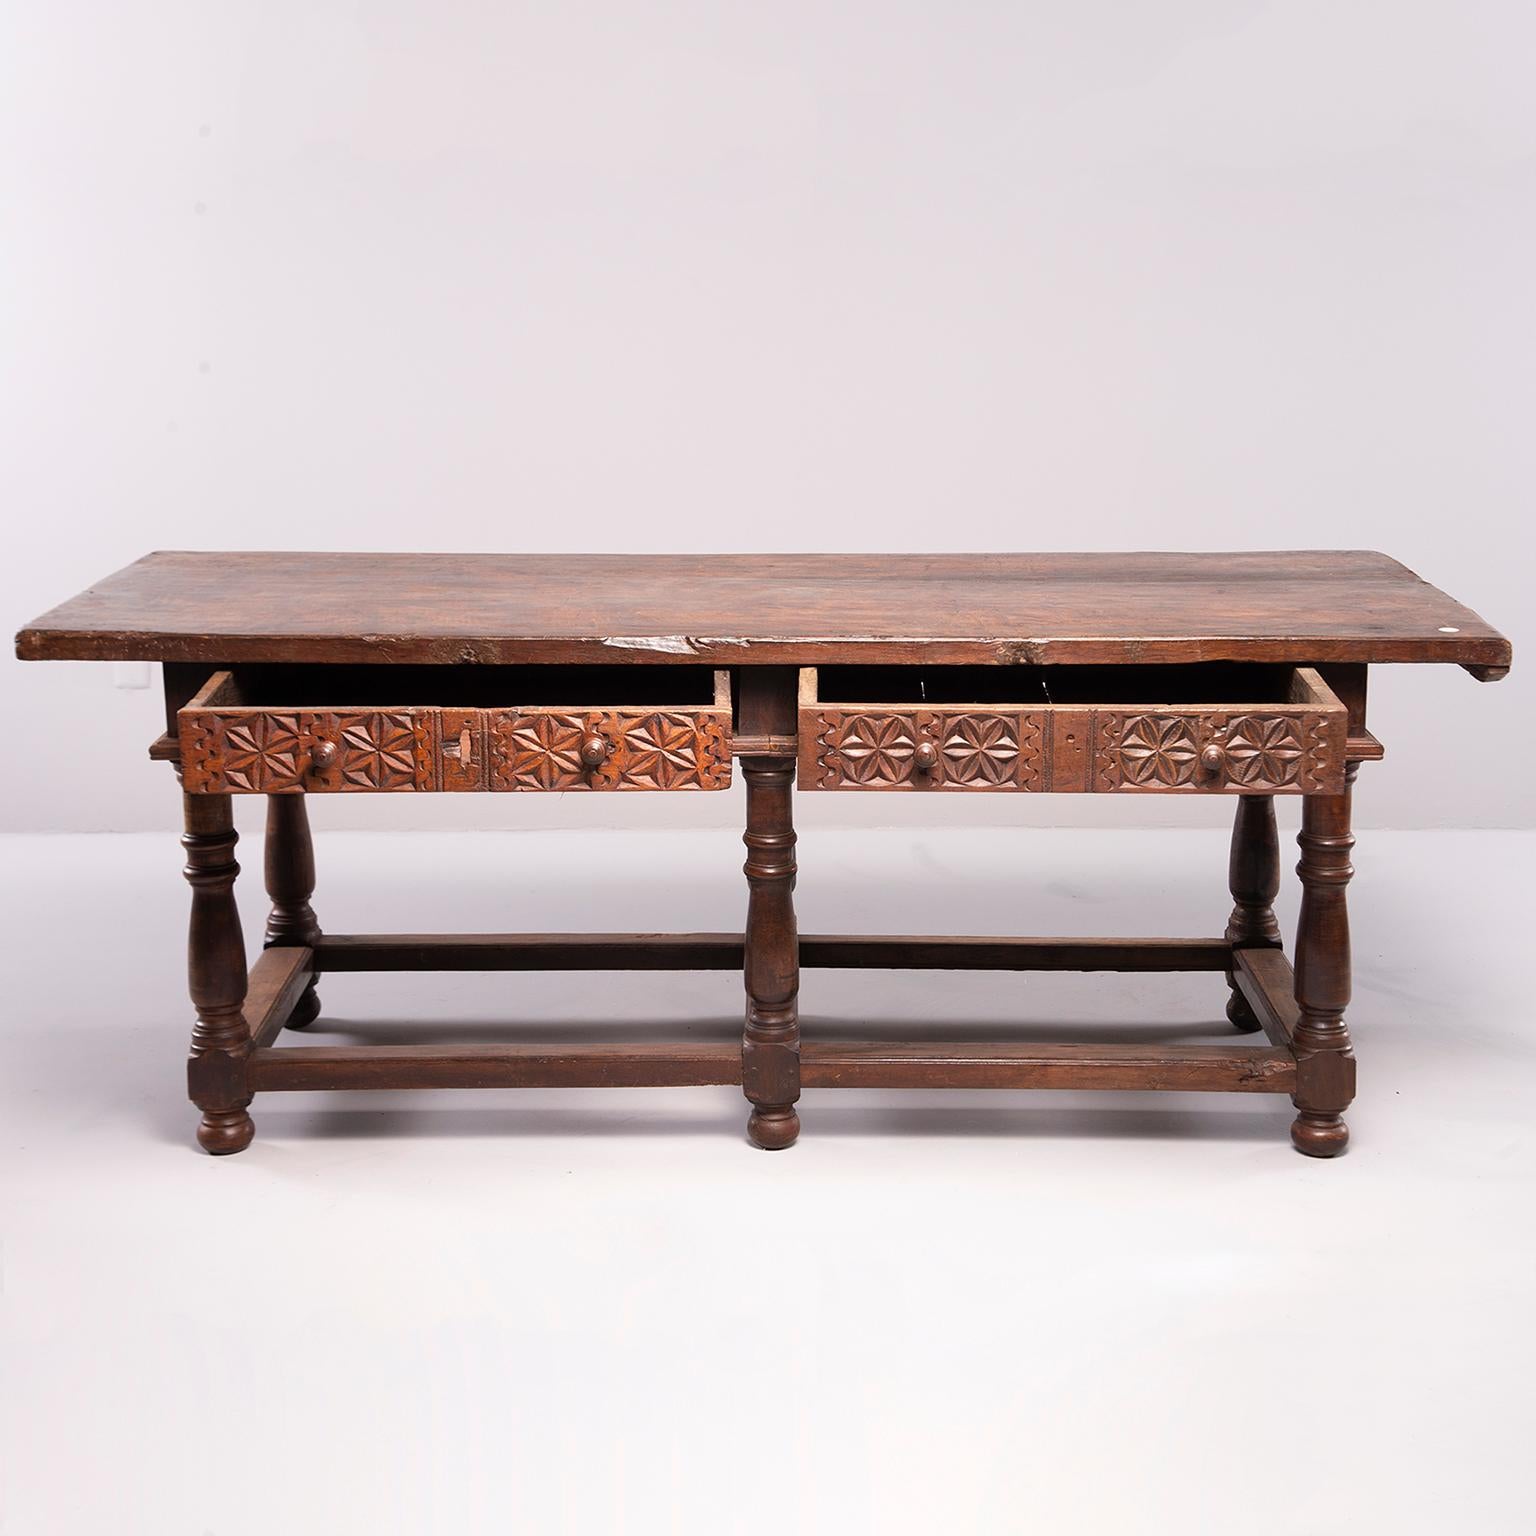 Large, six-legged all-original carved walnut  Portuguese table features turned legs with sturdy stretcher, carved details on sides, back and two drawer fronts, circa 1780s. Table top shows wear, patina, worm holes and has a smooth finish. Impressive